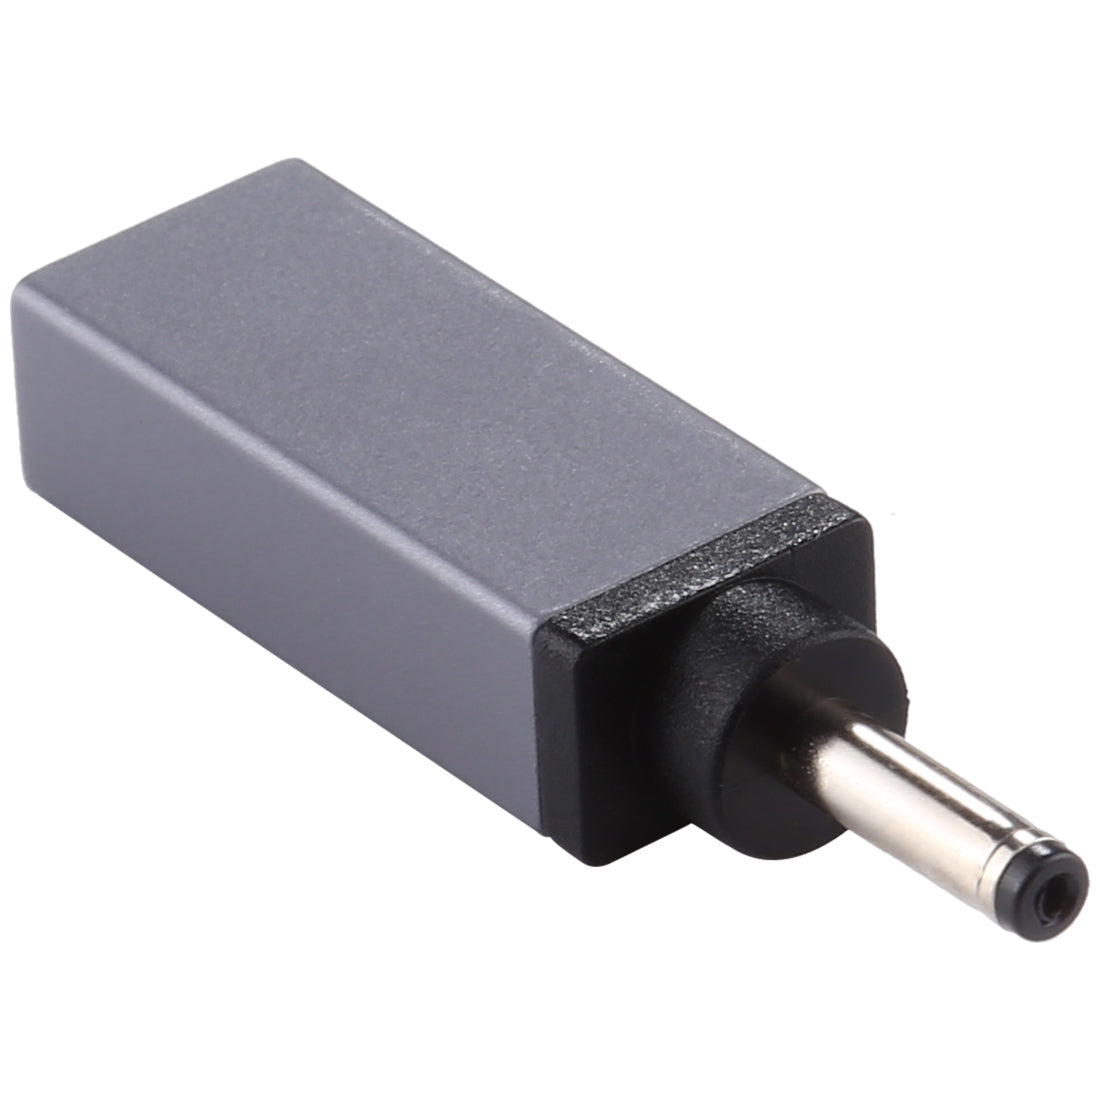 PD 18.5V-20V 3.5x1.35mm Male Adapter Connector